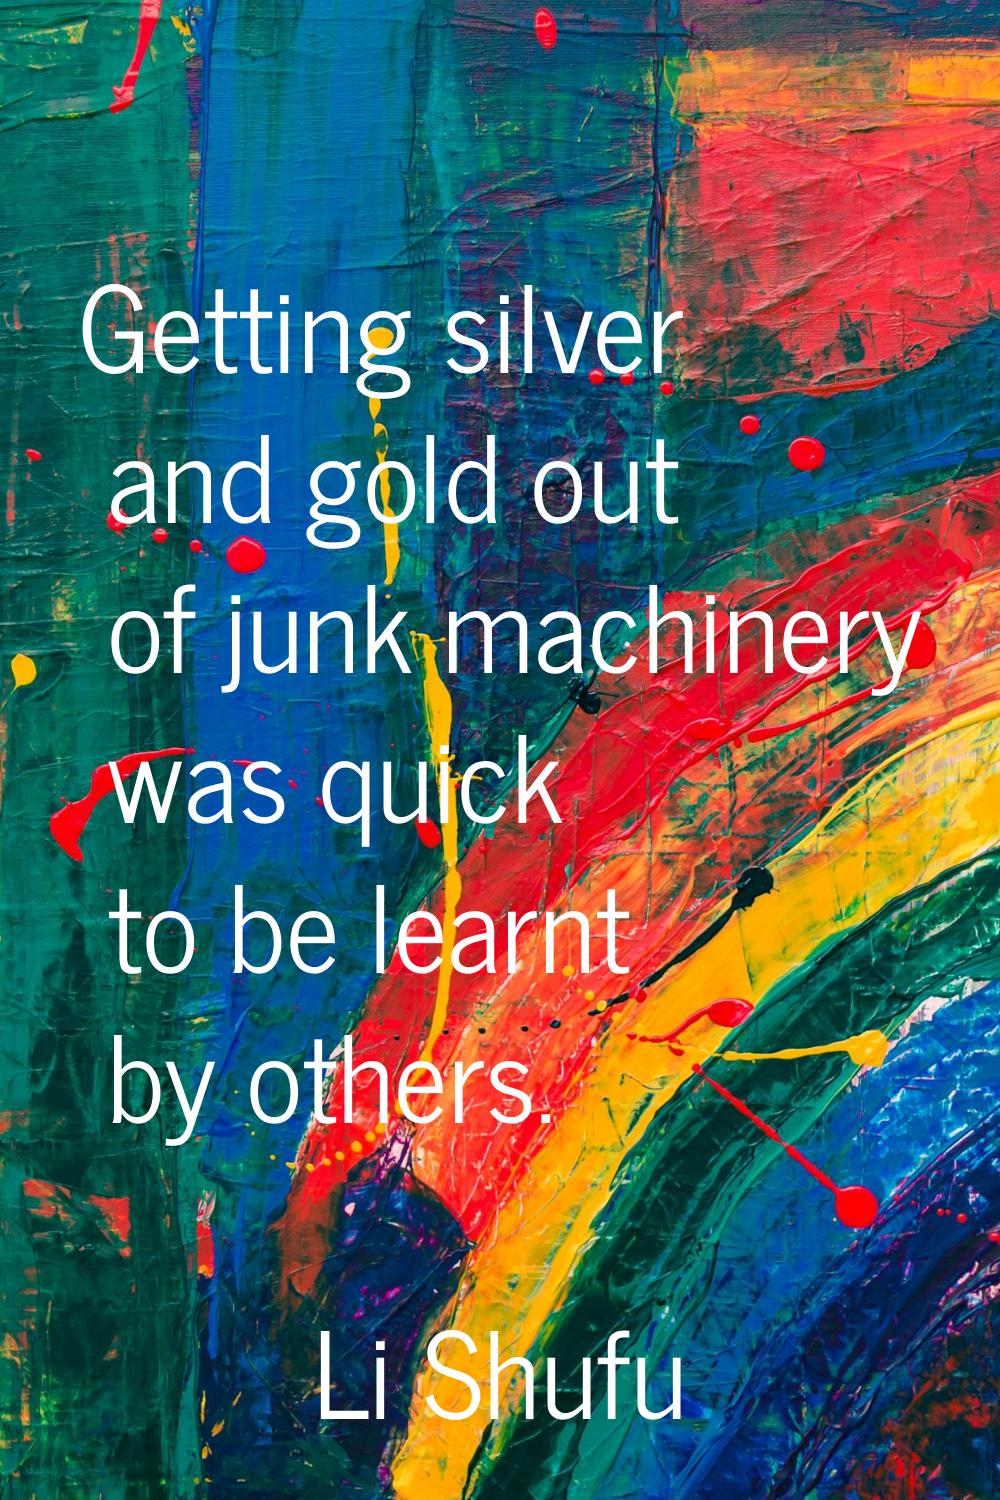 Getting silver and gold out of junk machinery was quick to be learnt by others.